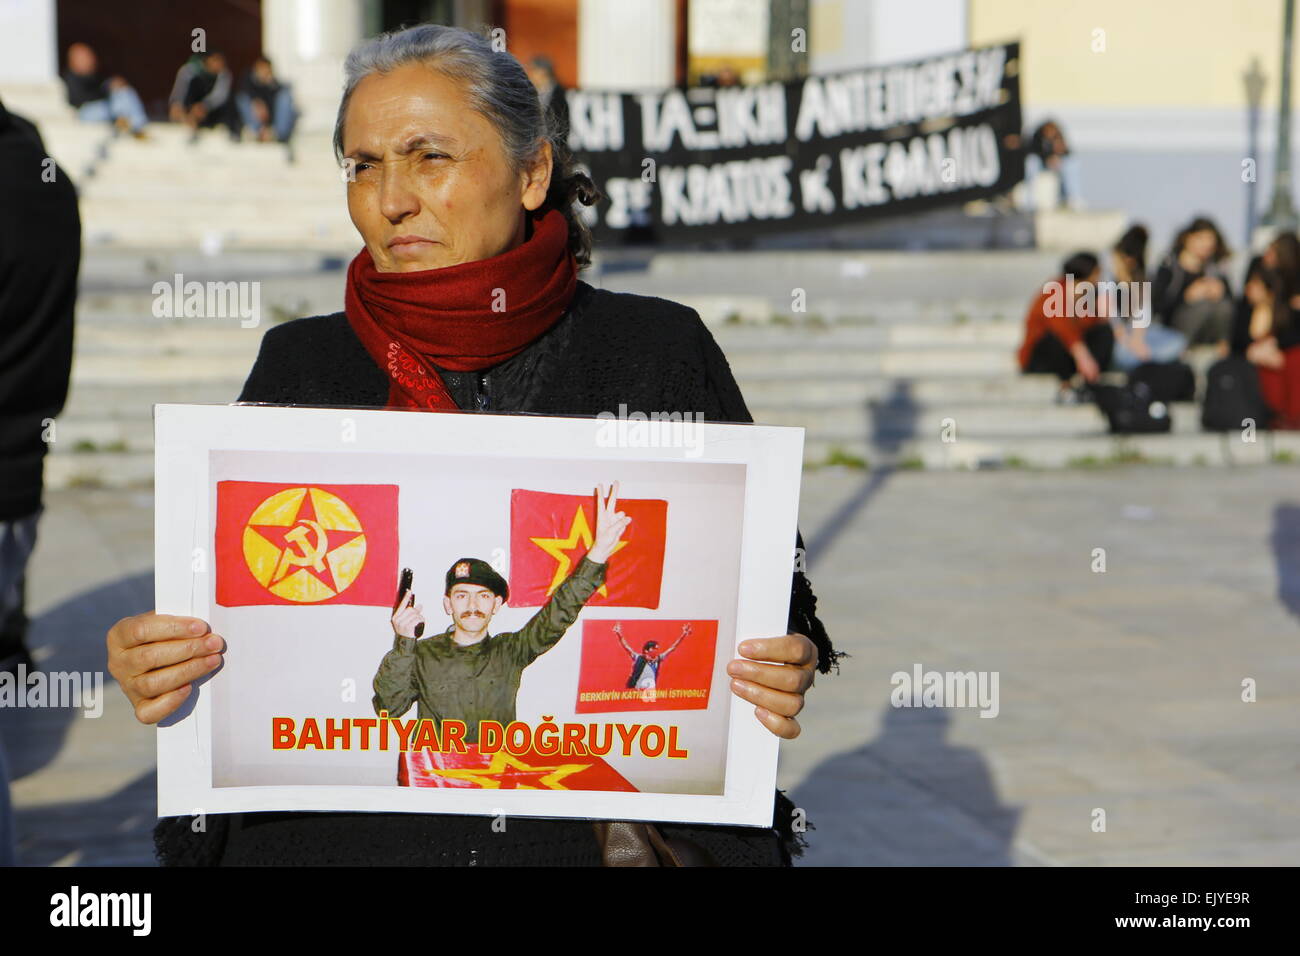 Athens, Greece. 02nd Apr, 2015. A woman holds a picture of one of the hostage takers, Bahtiyar Do?ruyol, with a pistol in his hand. A handful of protesters showed their solidarity with the two killed activists who had taken a prosecutor hostage in a Istanbul court house. They were calling for the truth in the killing of 15 year old Berkin Elvan who died during the Gezi protests after being hit by a tear gas canister from the police. © Michael Debets/Pacific Press/Alamy Live News Stock Photo